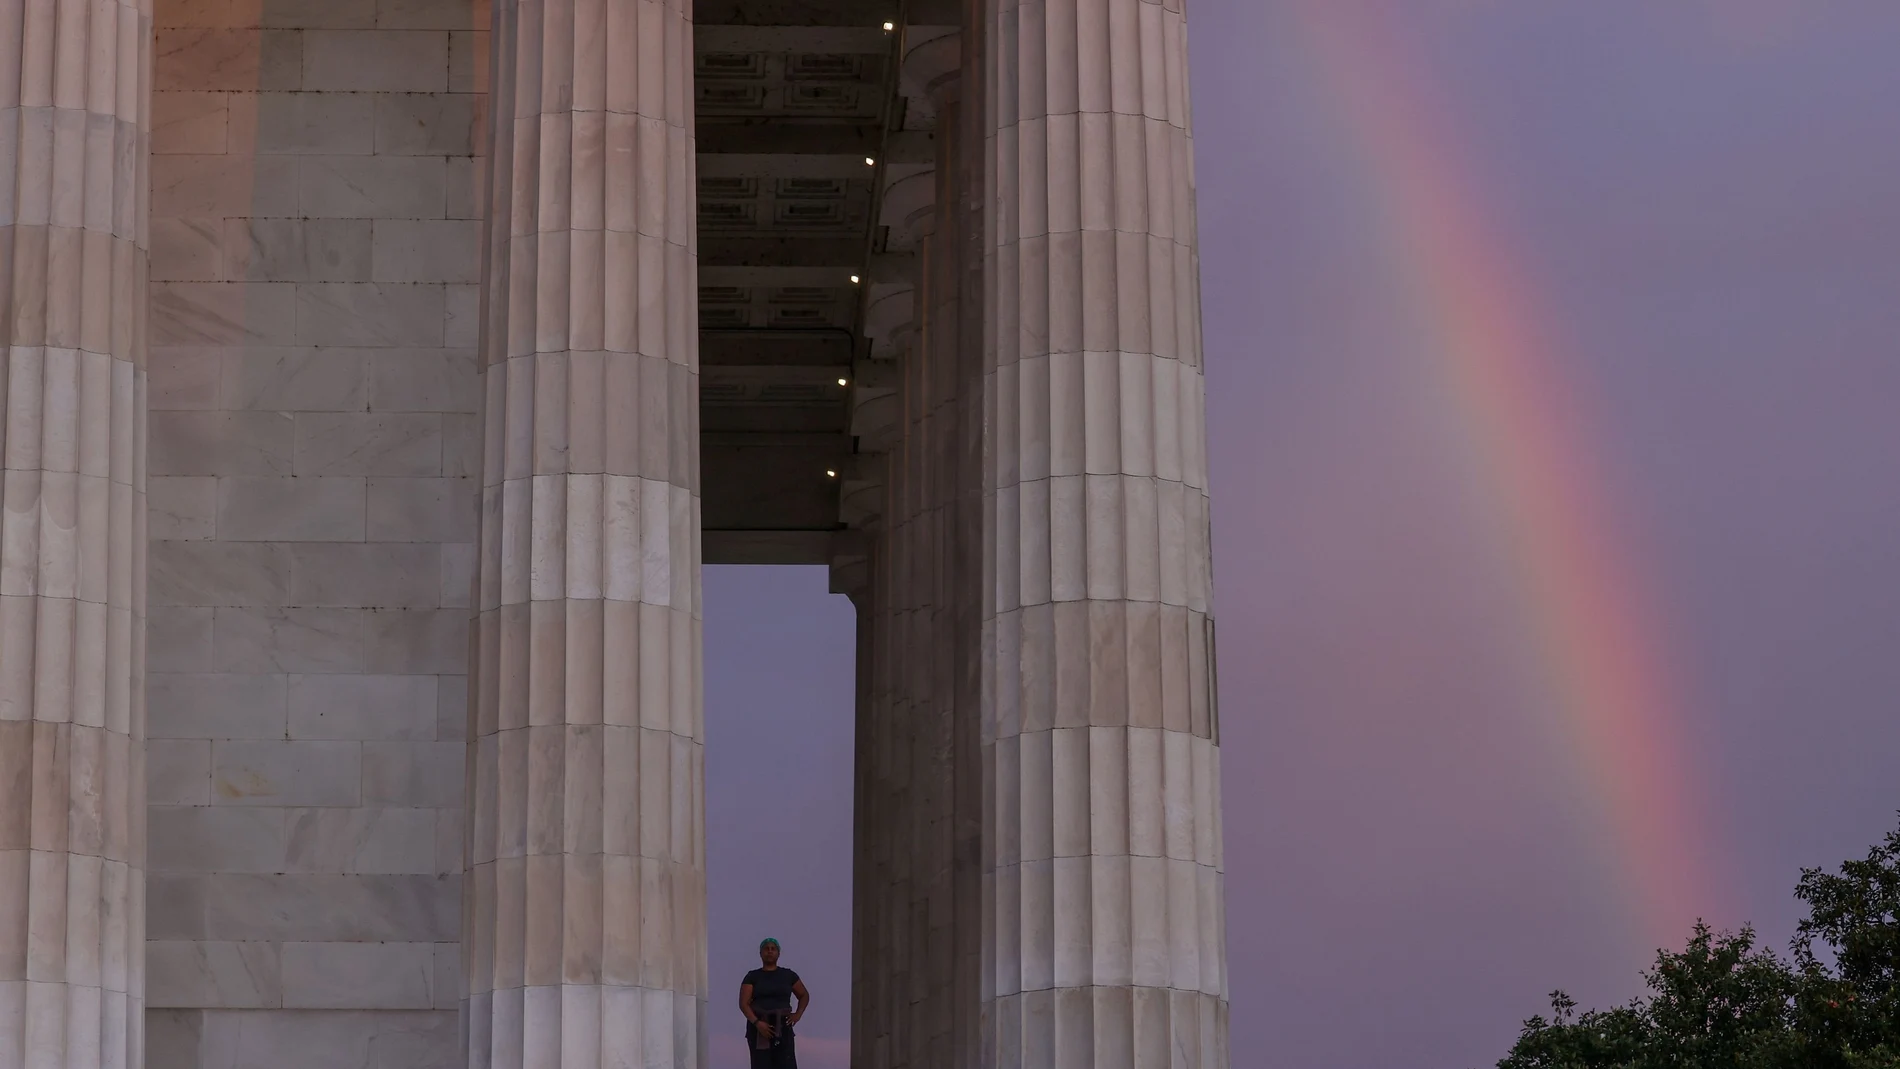 A rainbow appears behind the Lincoln Memorial as Fitzpatrick prepares to begin her day, coincidentally Juneteenth, with a sunrise walk in Washington